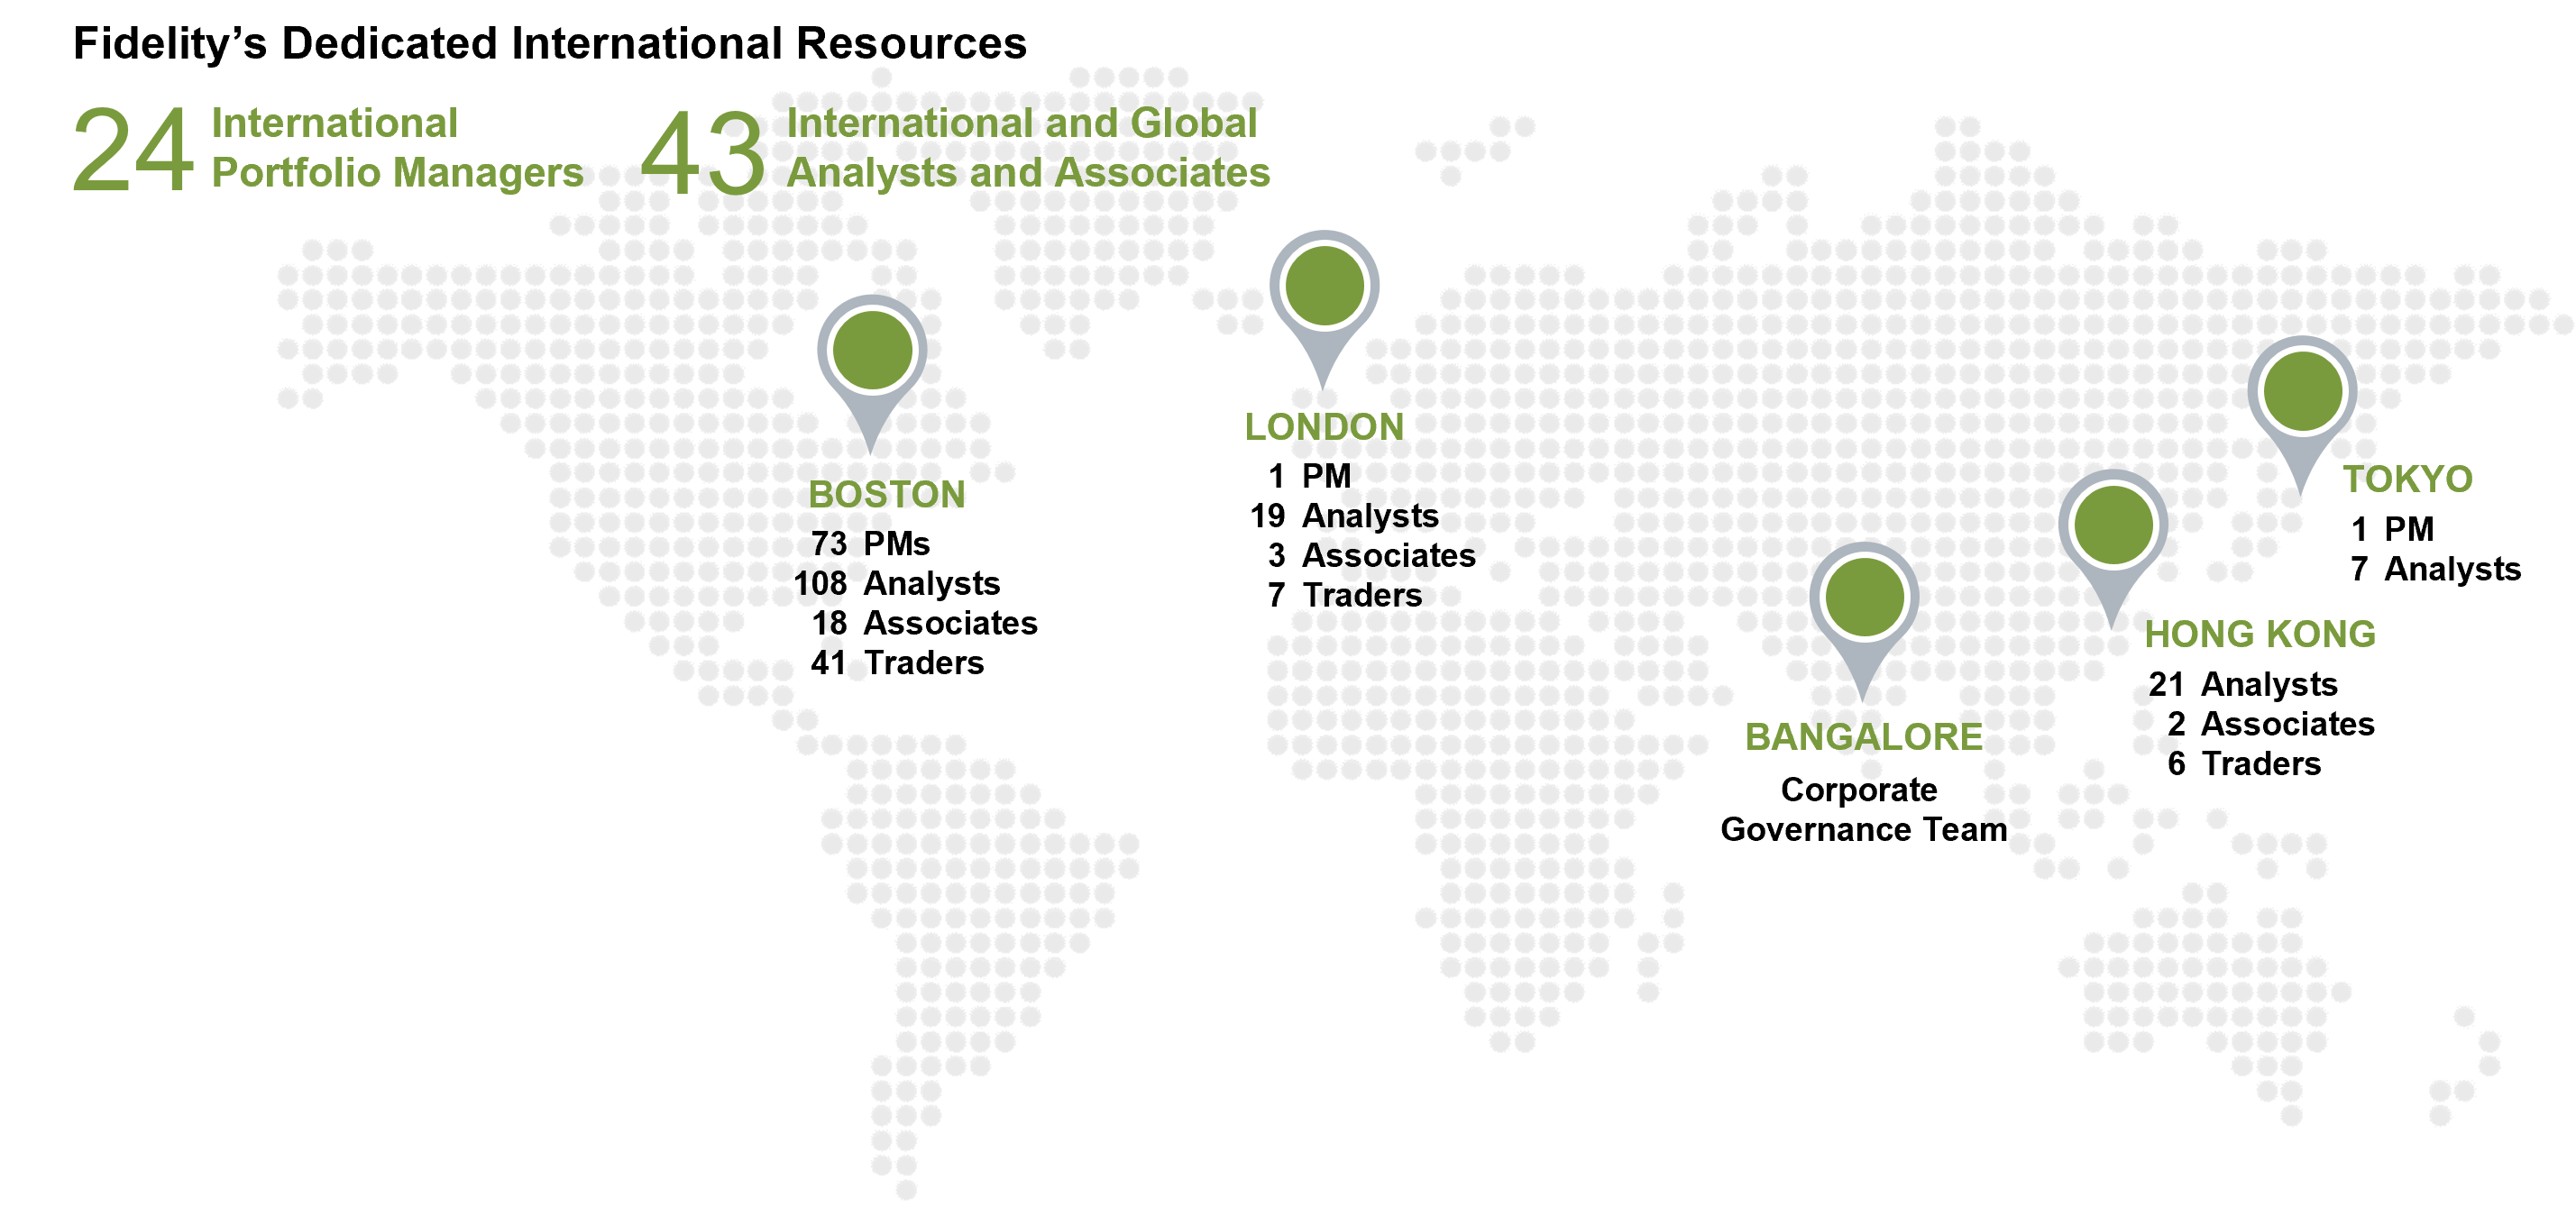 Graphic shows the global distribution of Fidelity's Dedicated International Resources. 24 International Portfolio Managers, 43 International and Global Analysts and Associates. Boston has 73 Portfolio Managers, 108 Analysts, 18 Associates and 41 Traders. London has 1 Portfolio Manager, 19 Analysts, 3 Associates, and 7 Traders. Bangalore has a Corporate Governance Team. Hong Kong has 21 Analysts, 2 Associates, and 6 Traders. Tokyo has 1 Portfolio Manager and 7 Analysts.